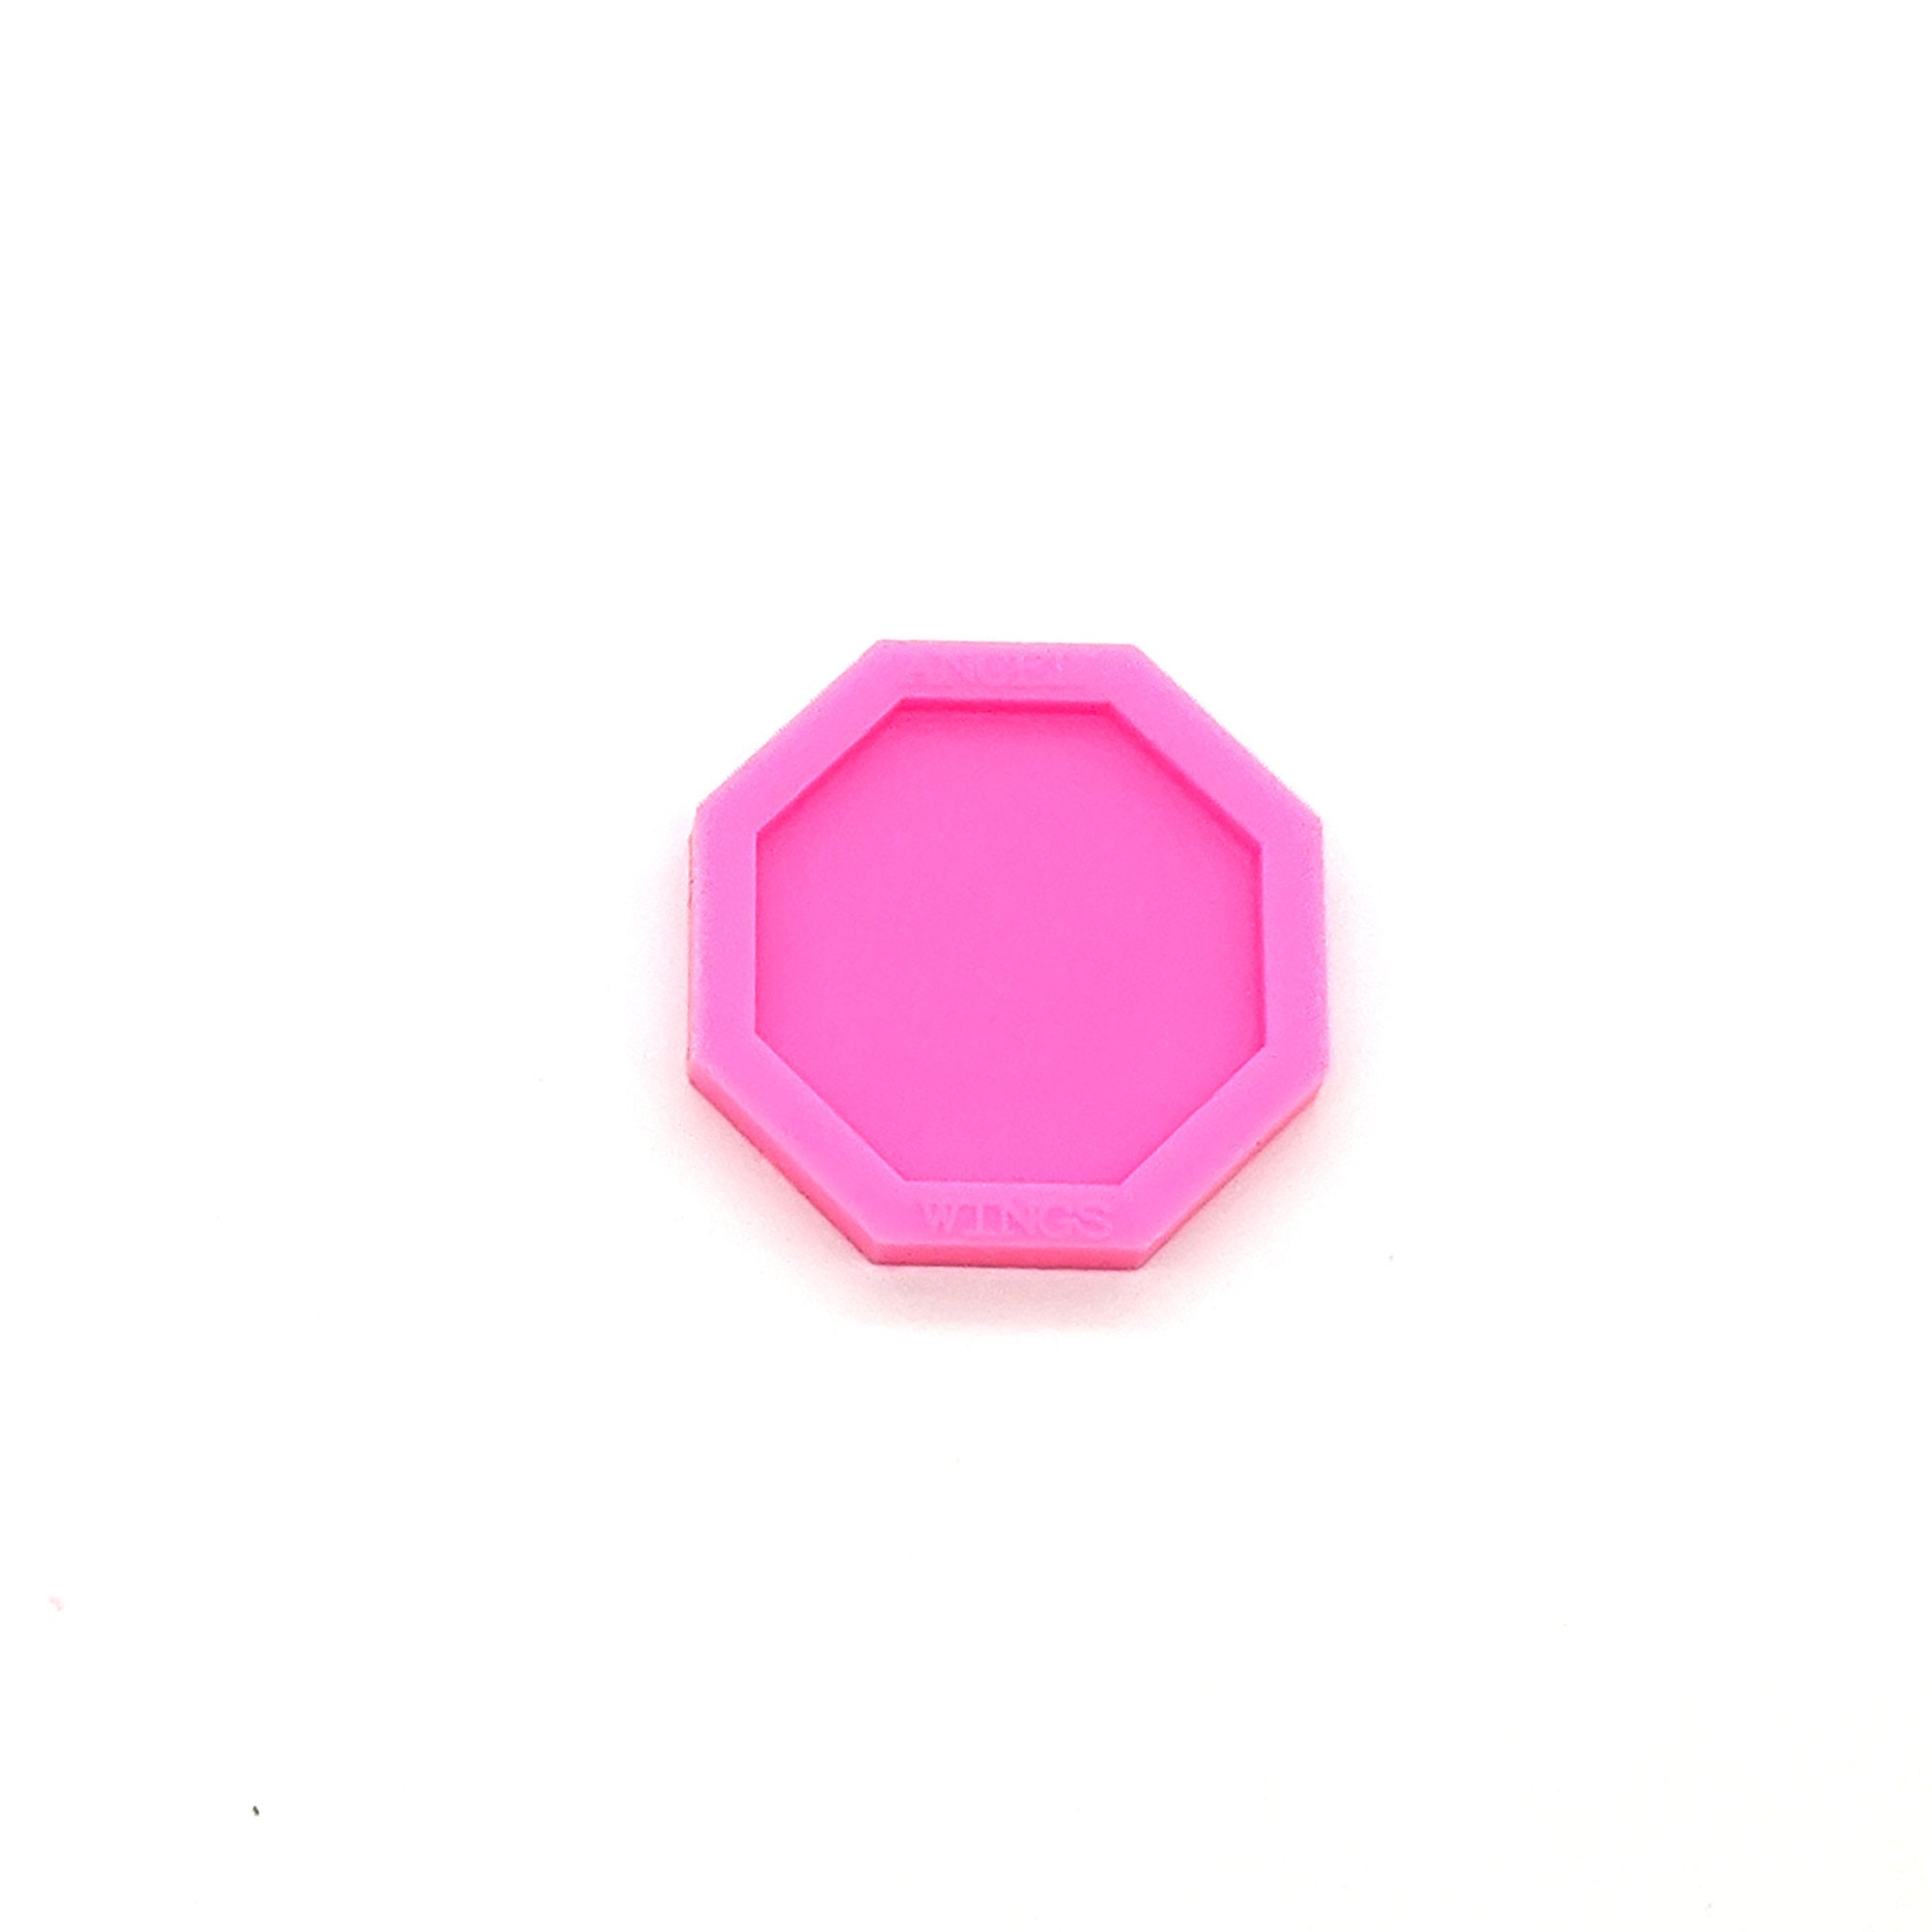 Octagon Phone Grip Shiny Silicone Mold